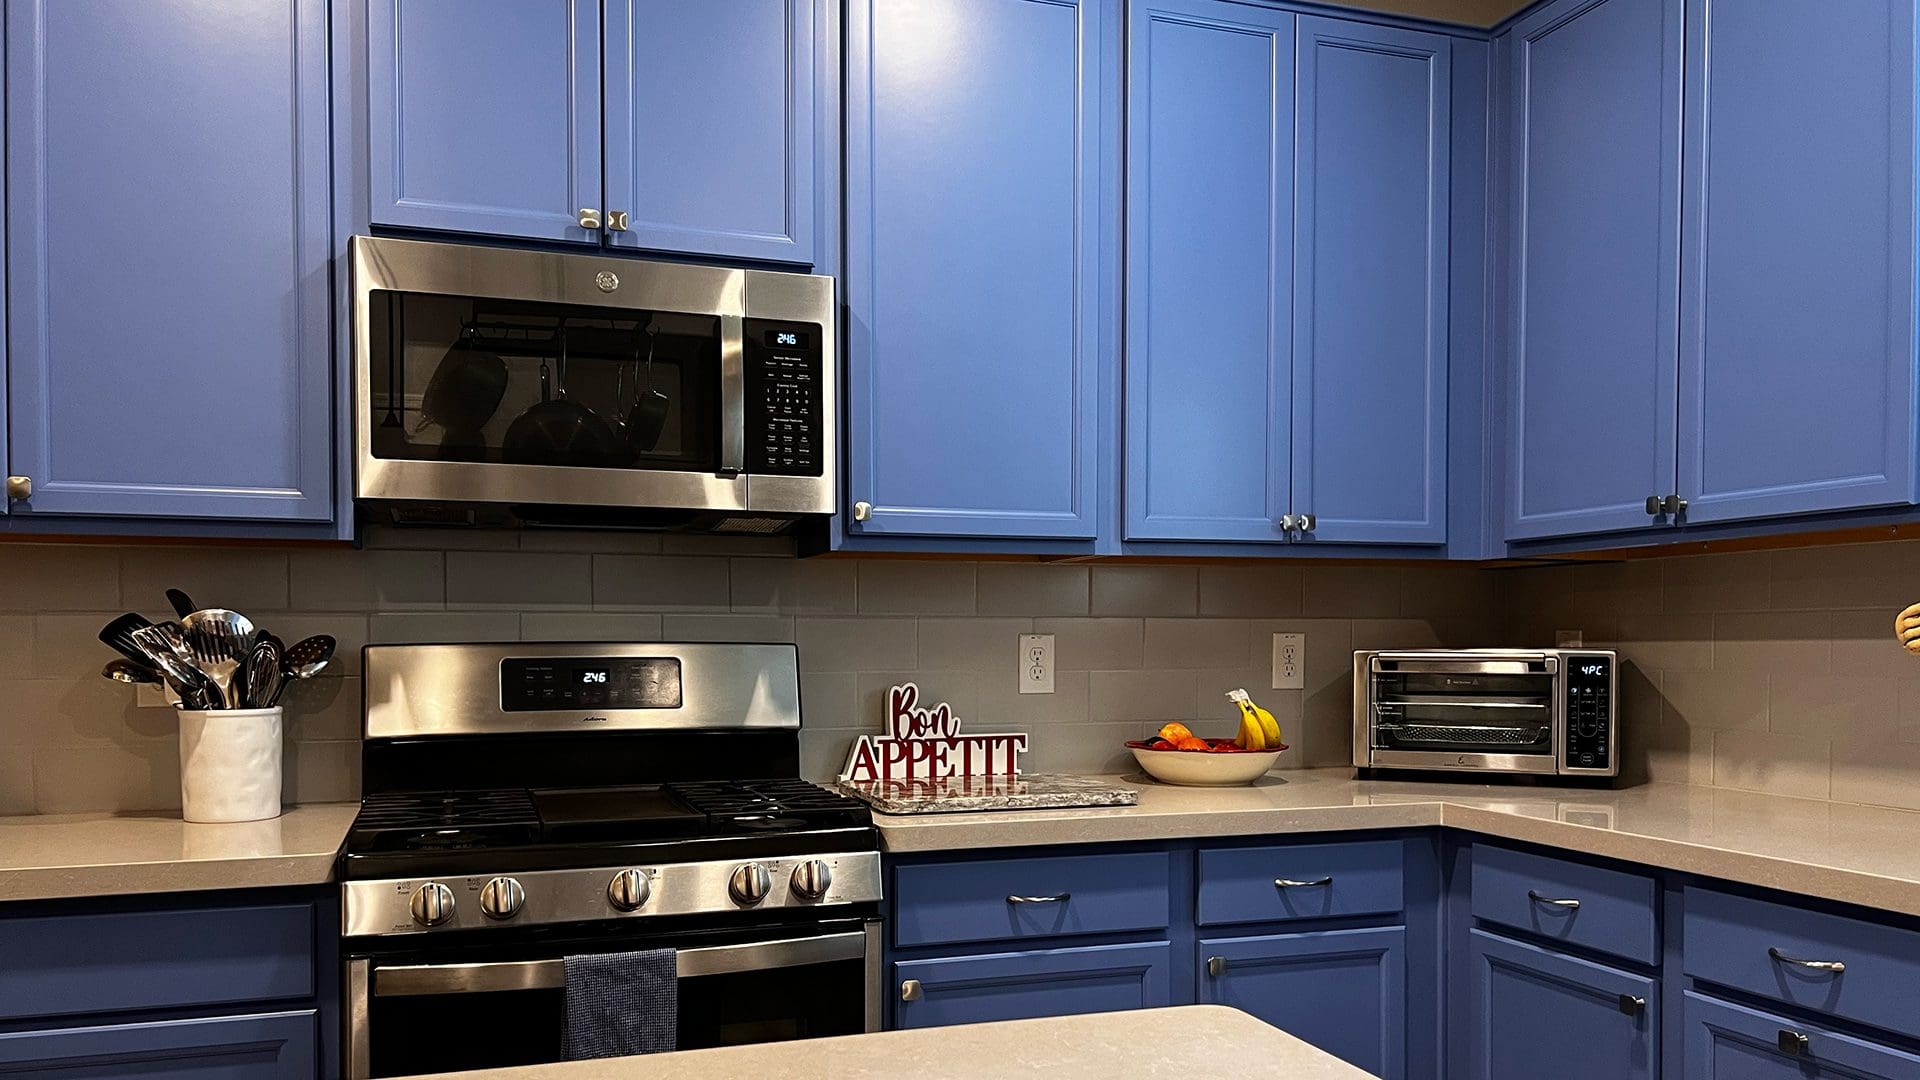 Kitchen with freshly painted blue cabinets